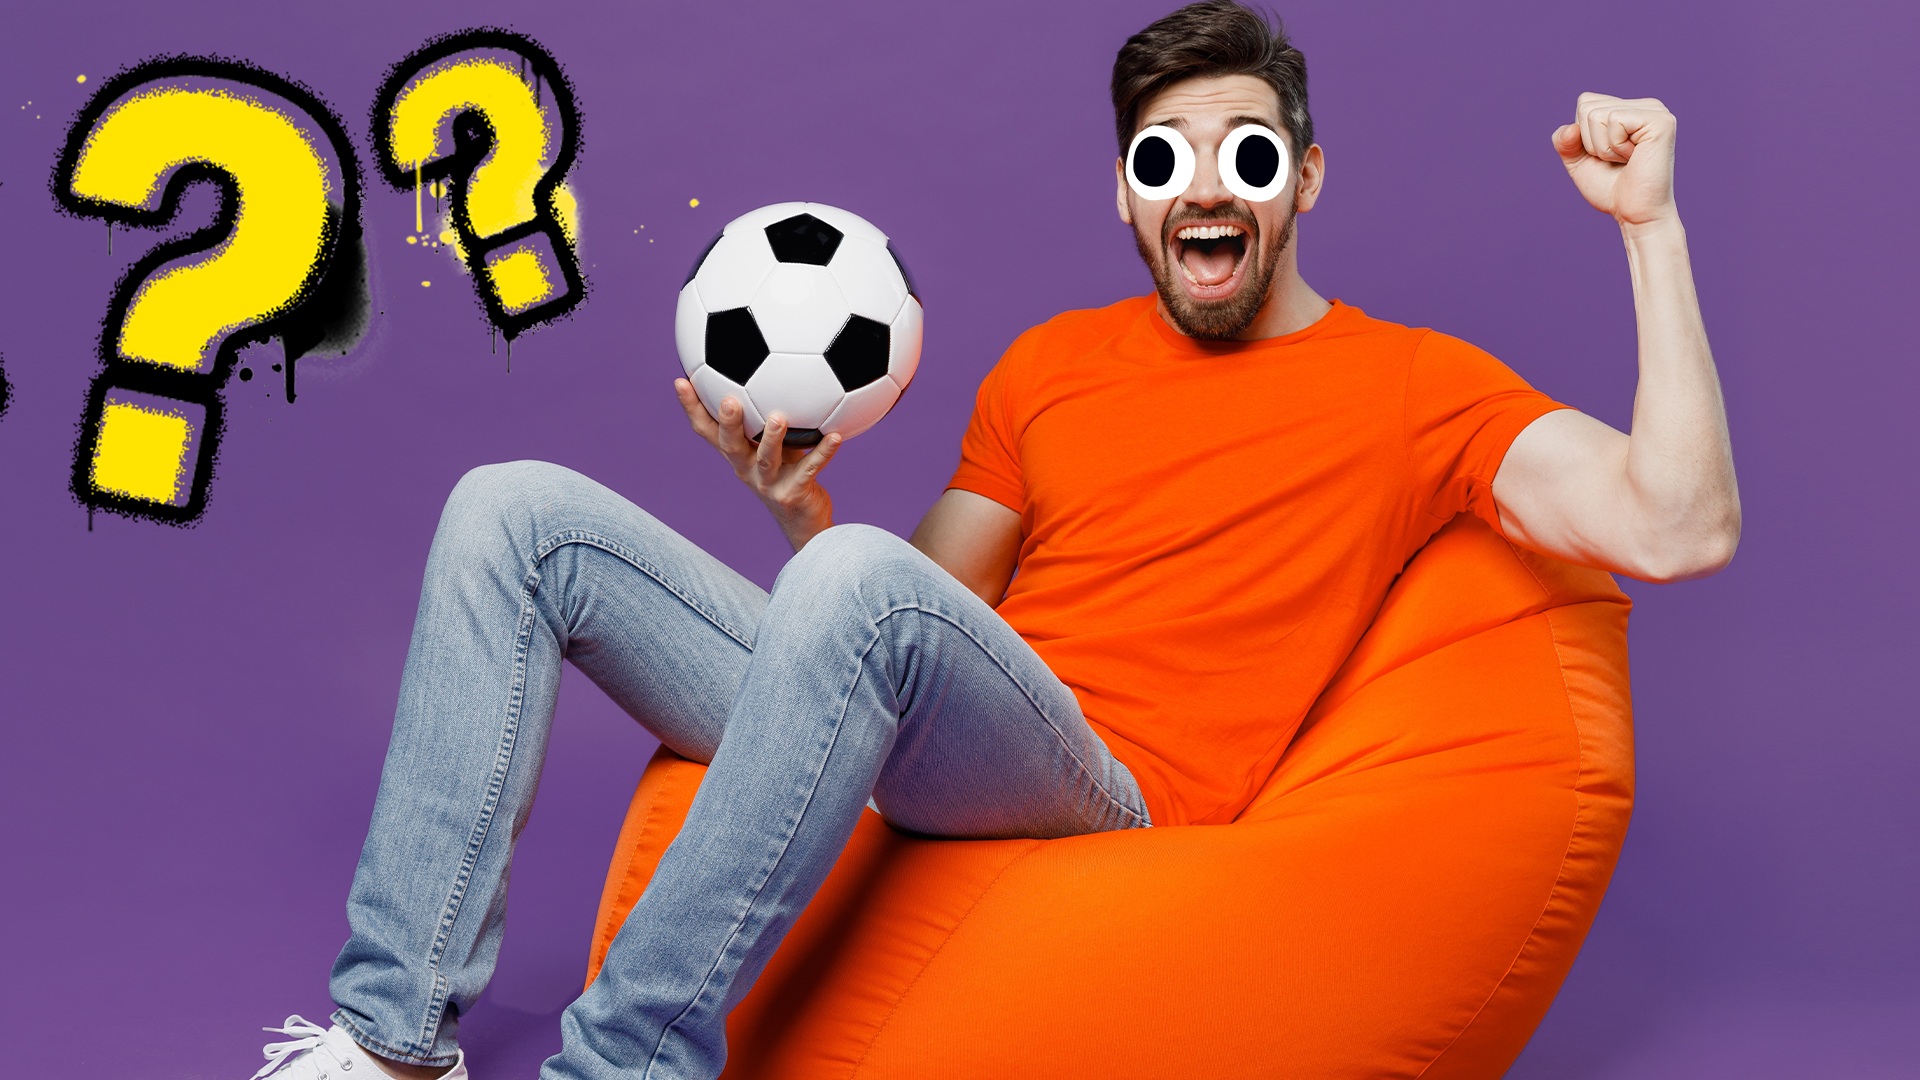 A man on a beanbag with a football and some question marks